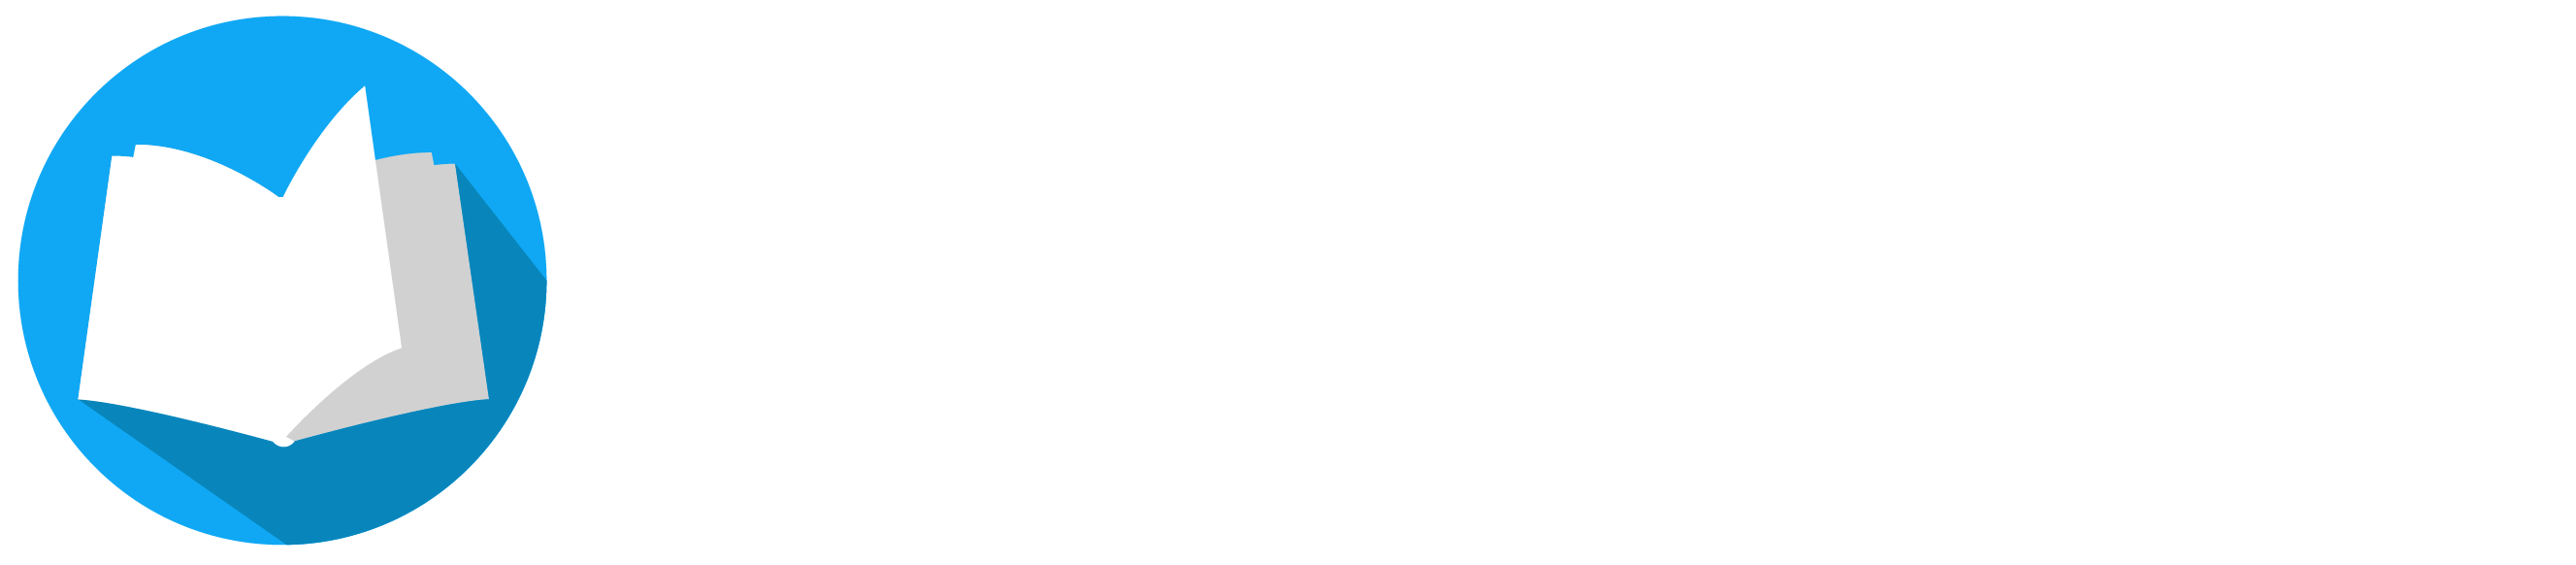 Dyslexia Support and Learning Centre logo